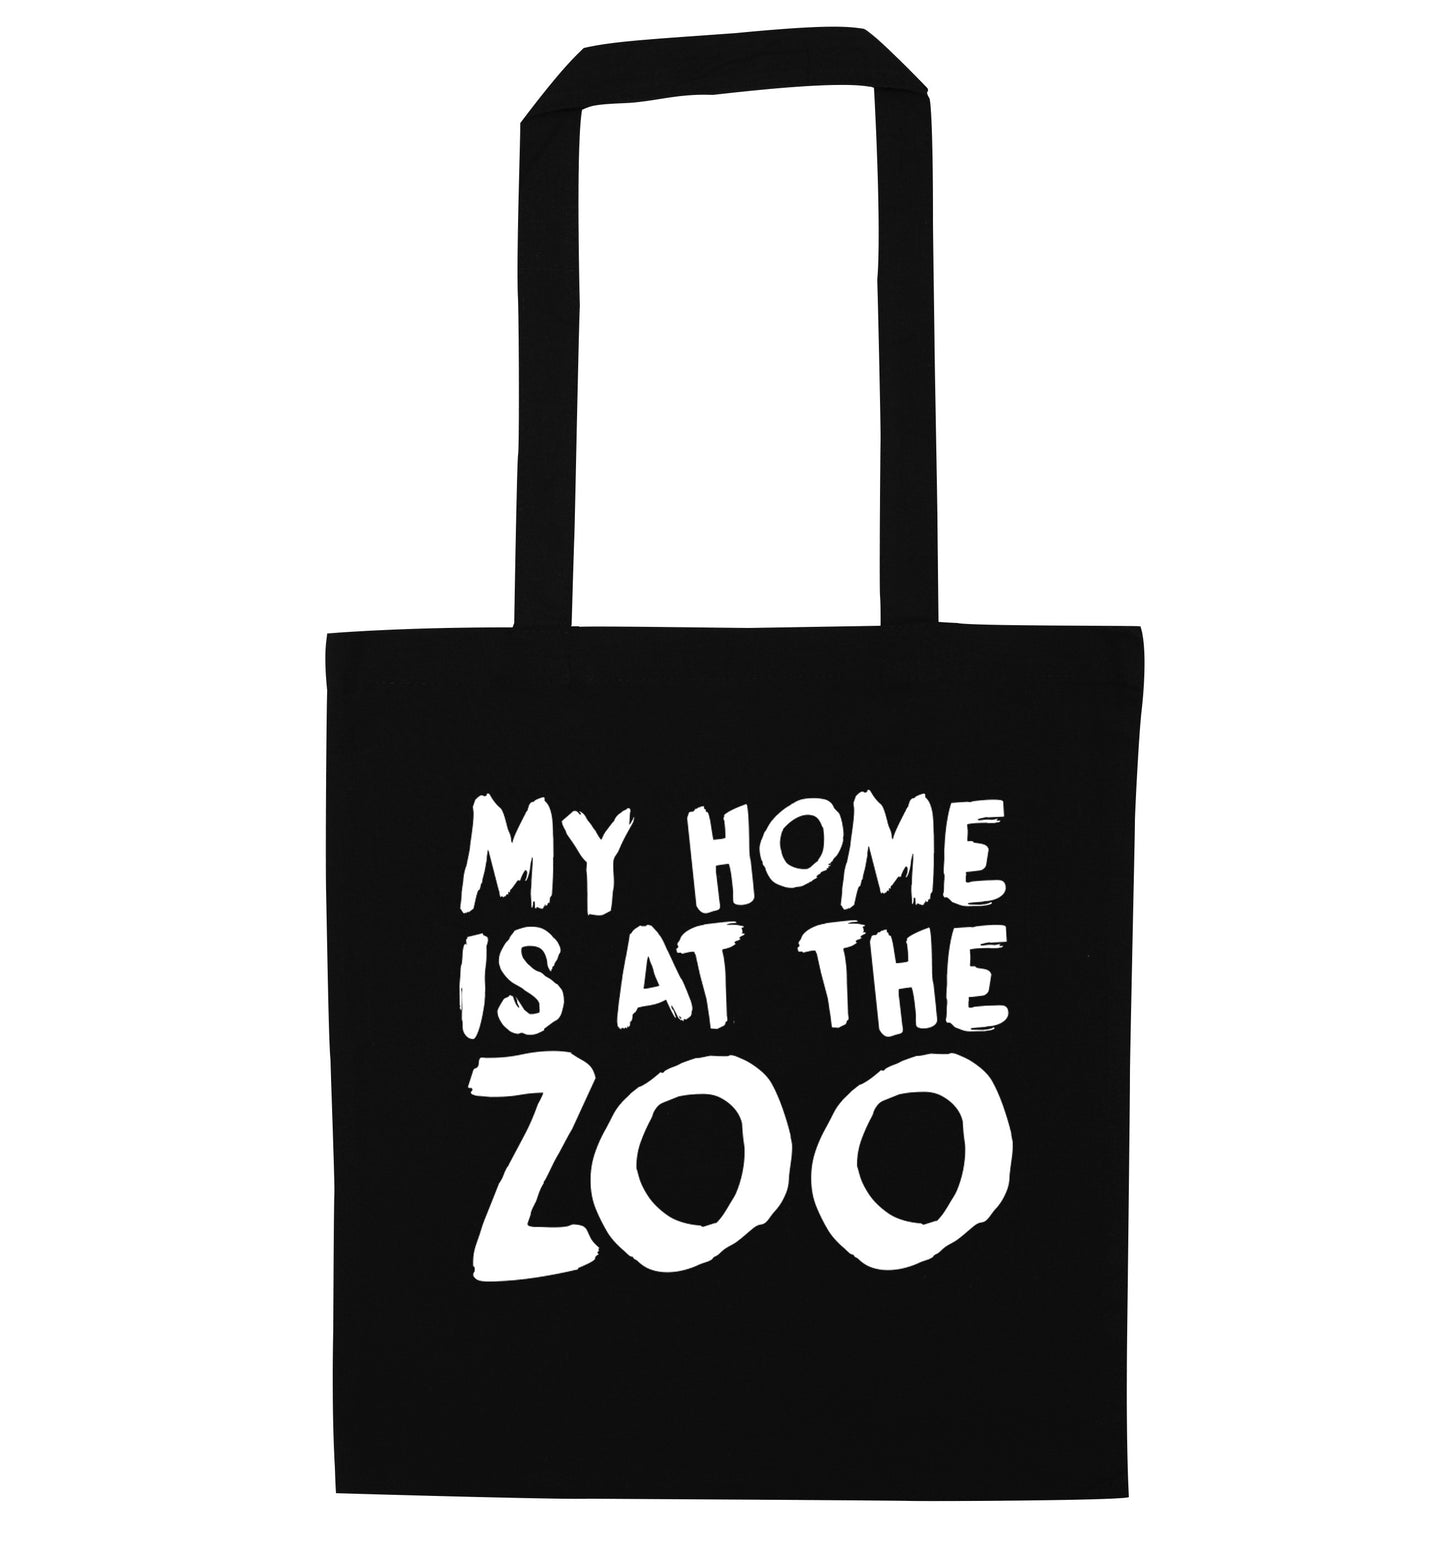 My home is at the zoo black tote bag